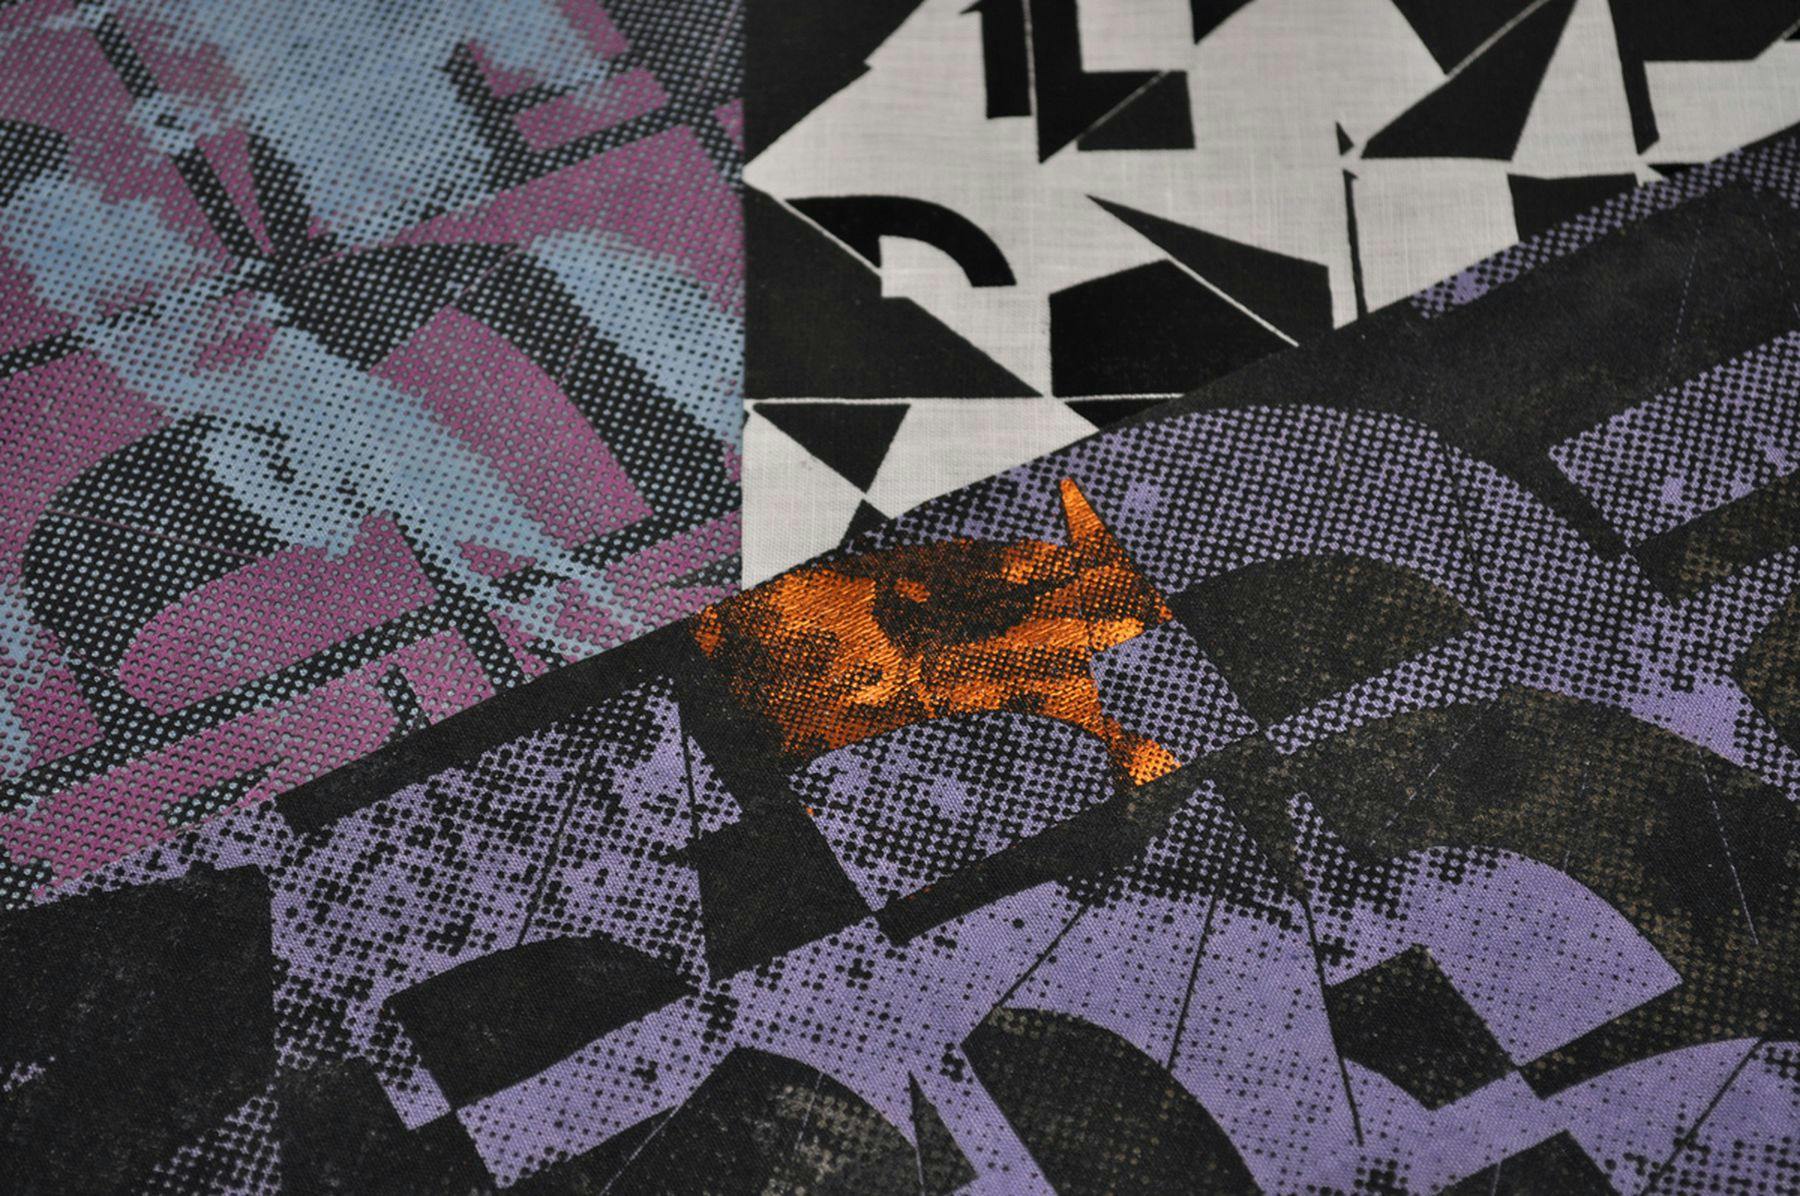 A photograph of a printed design with abstract shapes. One third of the design has a dark pink background with blue and black shapes. The other third has a white background with black shapes and the last part of the design has purple shapes on a black background.